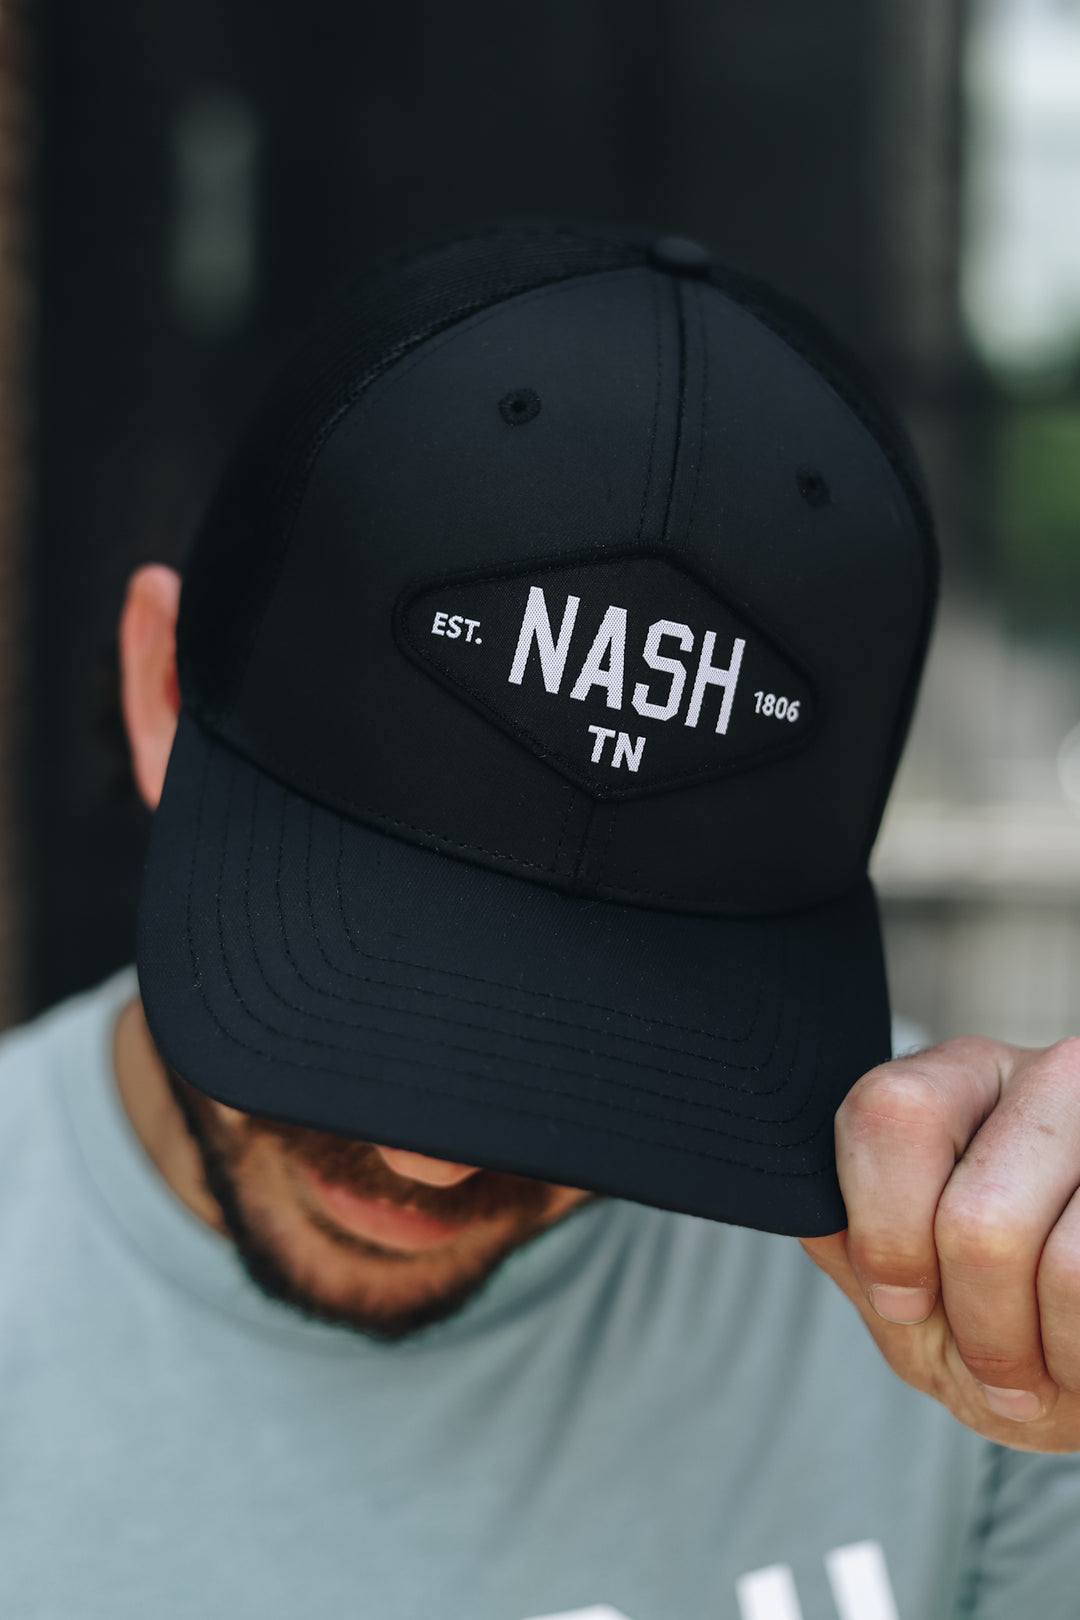 Up close view of the NASH Est. 1806 Trucker in black